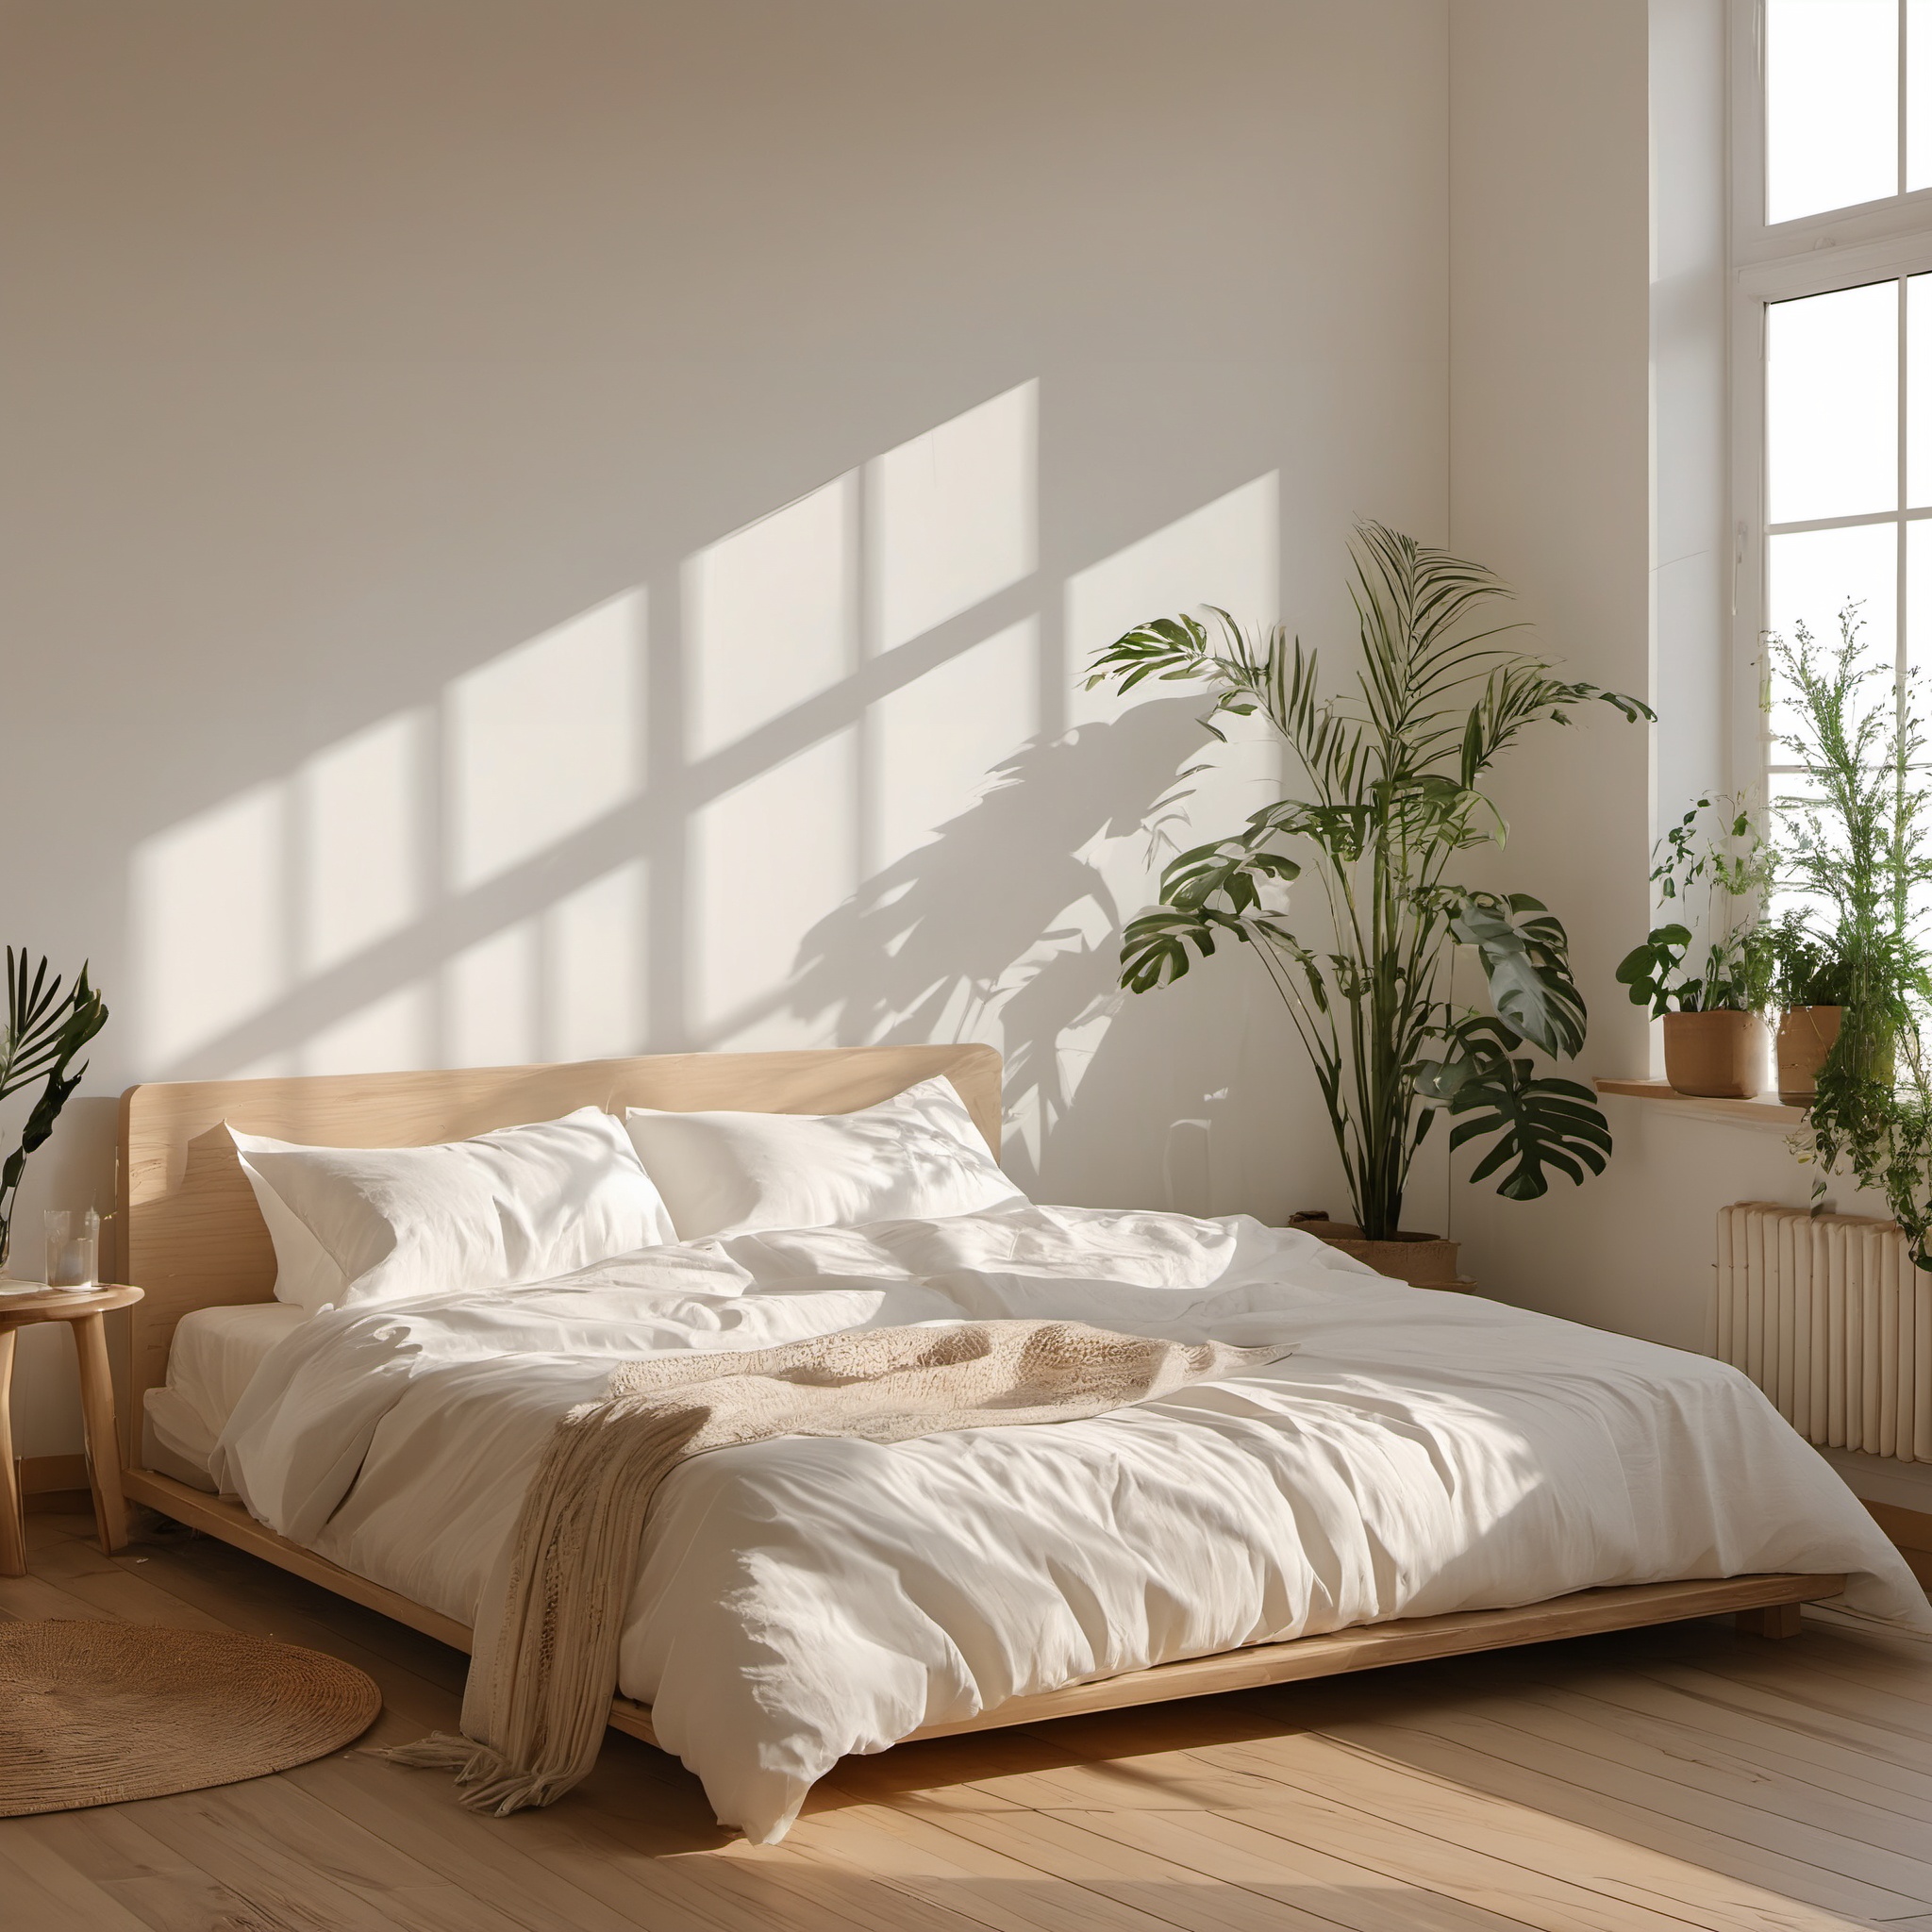 no humans,plant,wooden floor,indoors,window,sunlight,potted plant,shadow,day,pillow,bed,bed_sheet,JDWS 